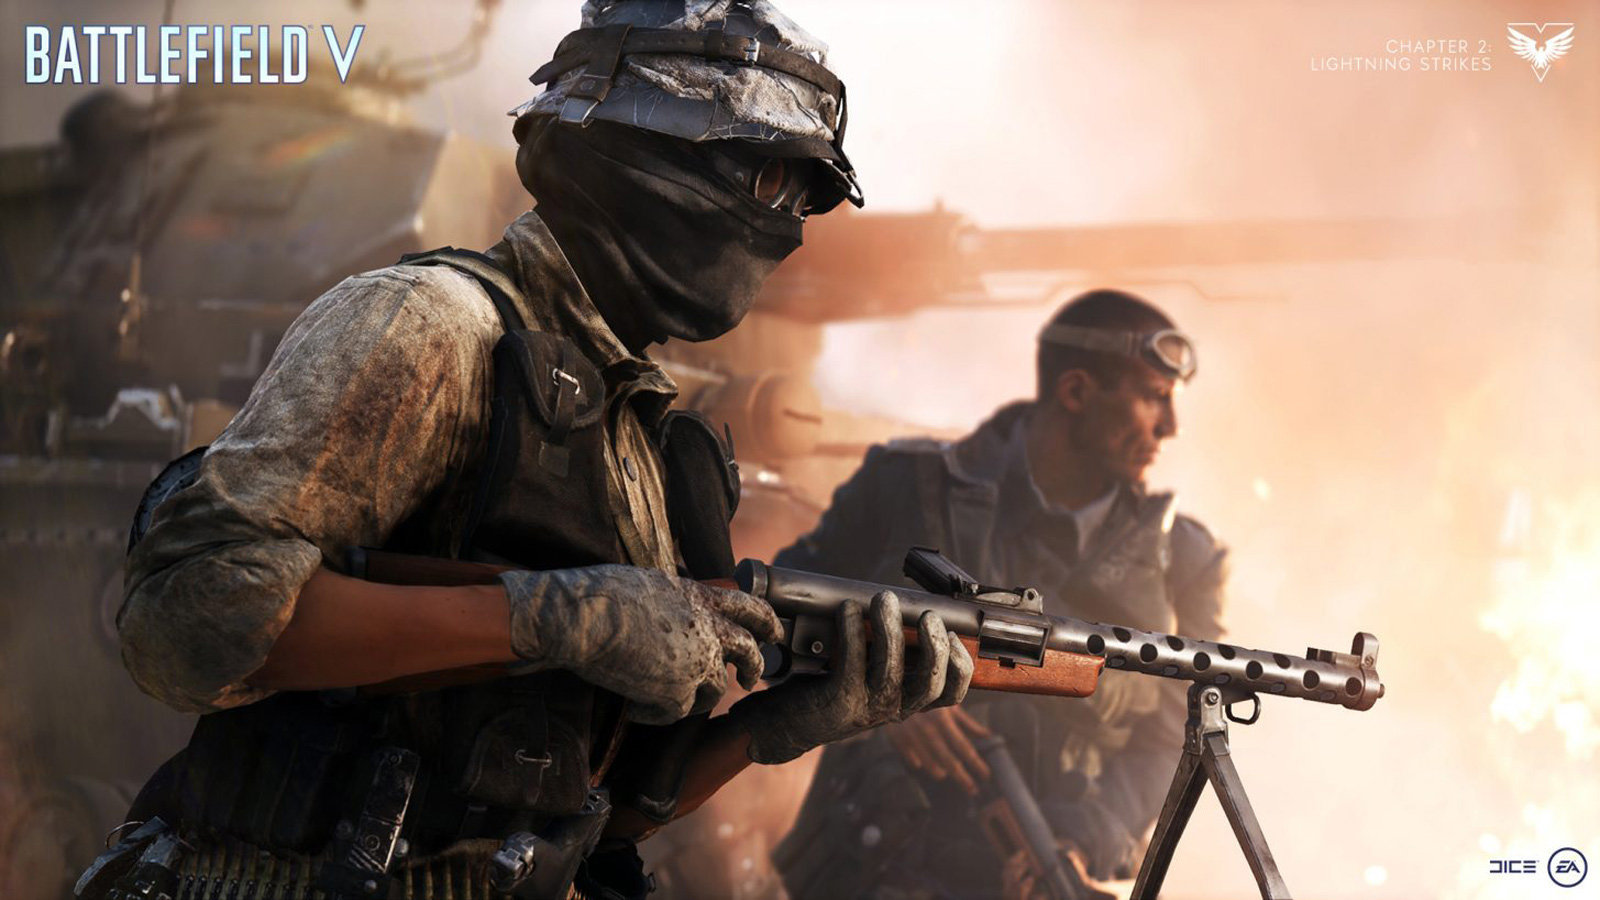 Marita, New Battlefield V Map Goes Live On PC, Xbox One And PlayStation Via 4.2.1 Update